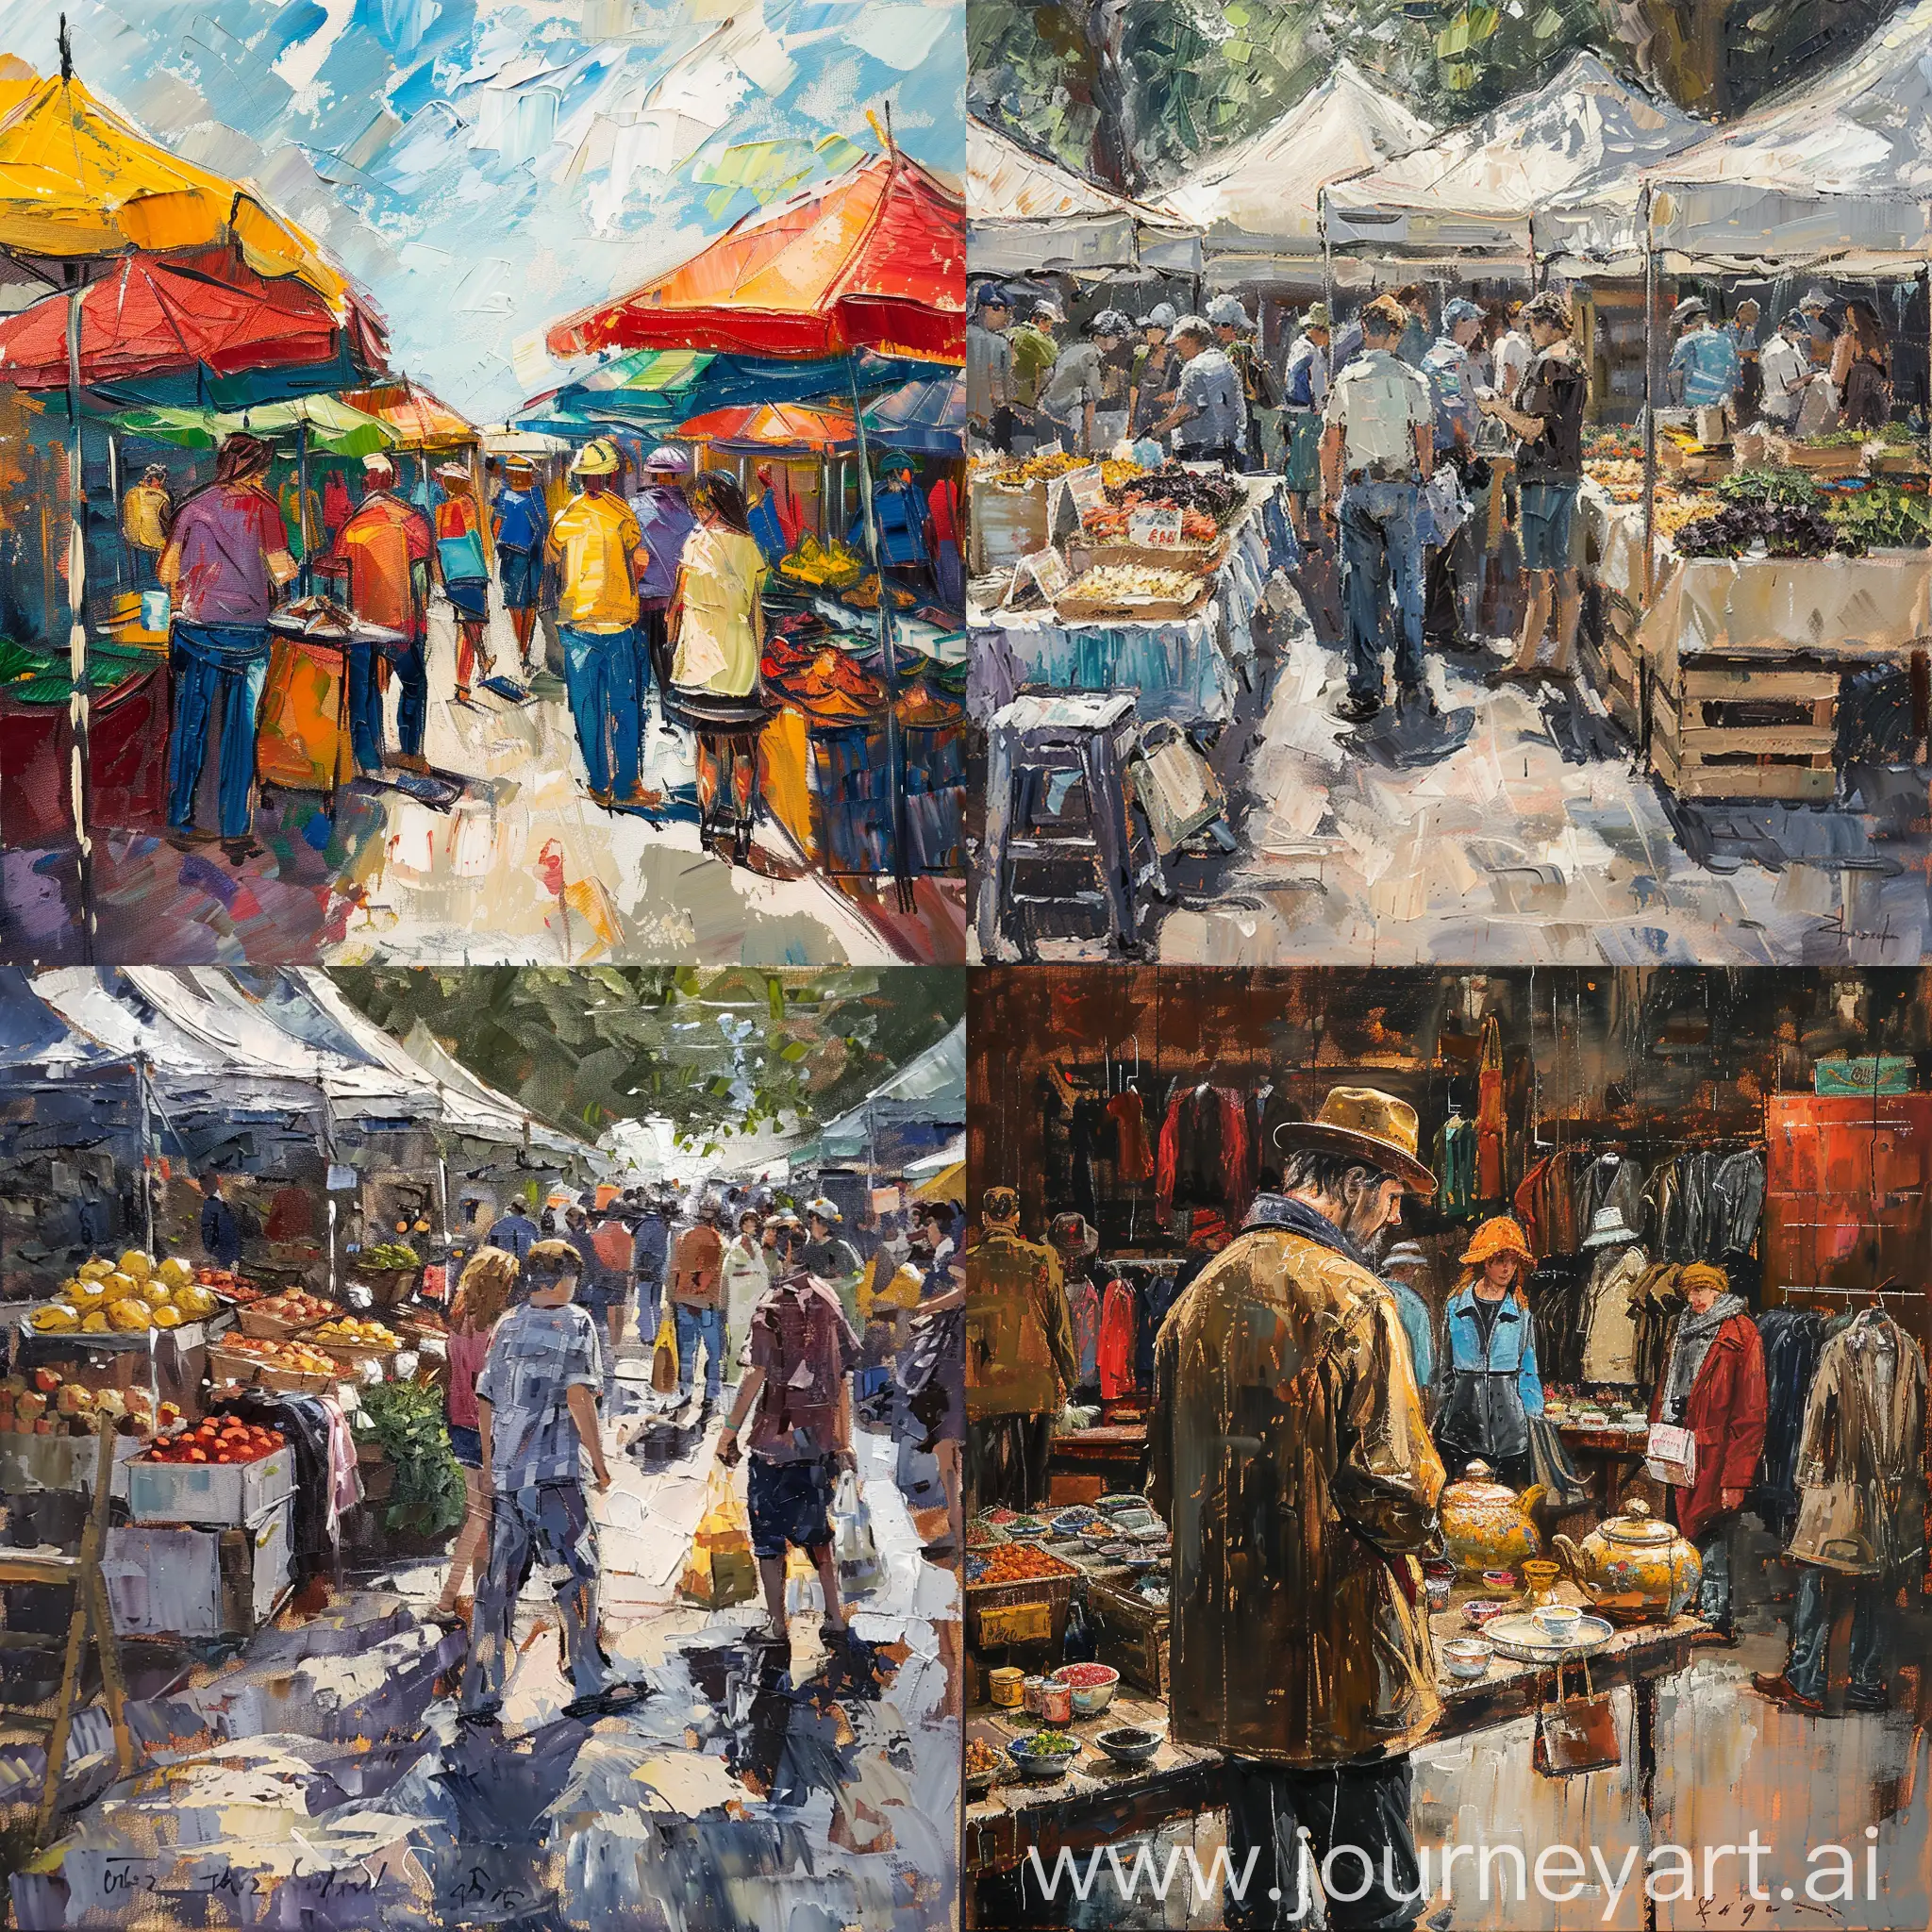 Colorful-Flea-Market-Promotional-Painting-Displaying-Eclectic-Items